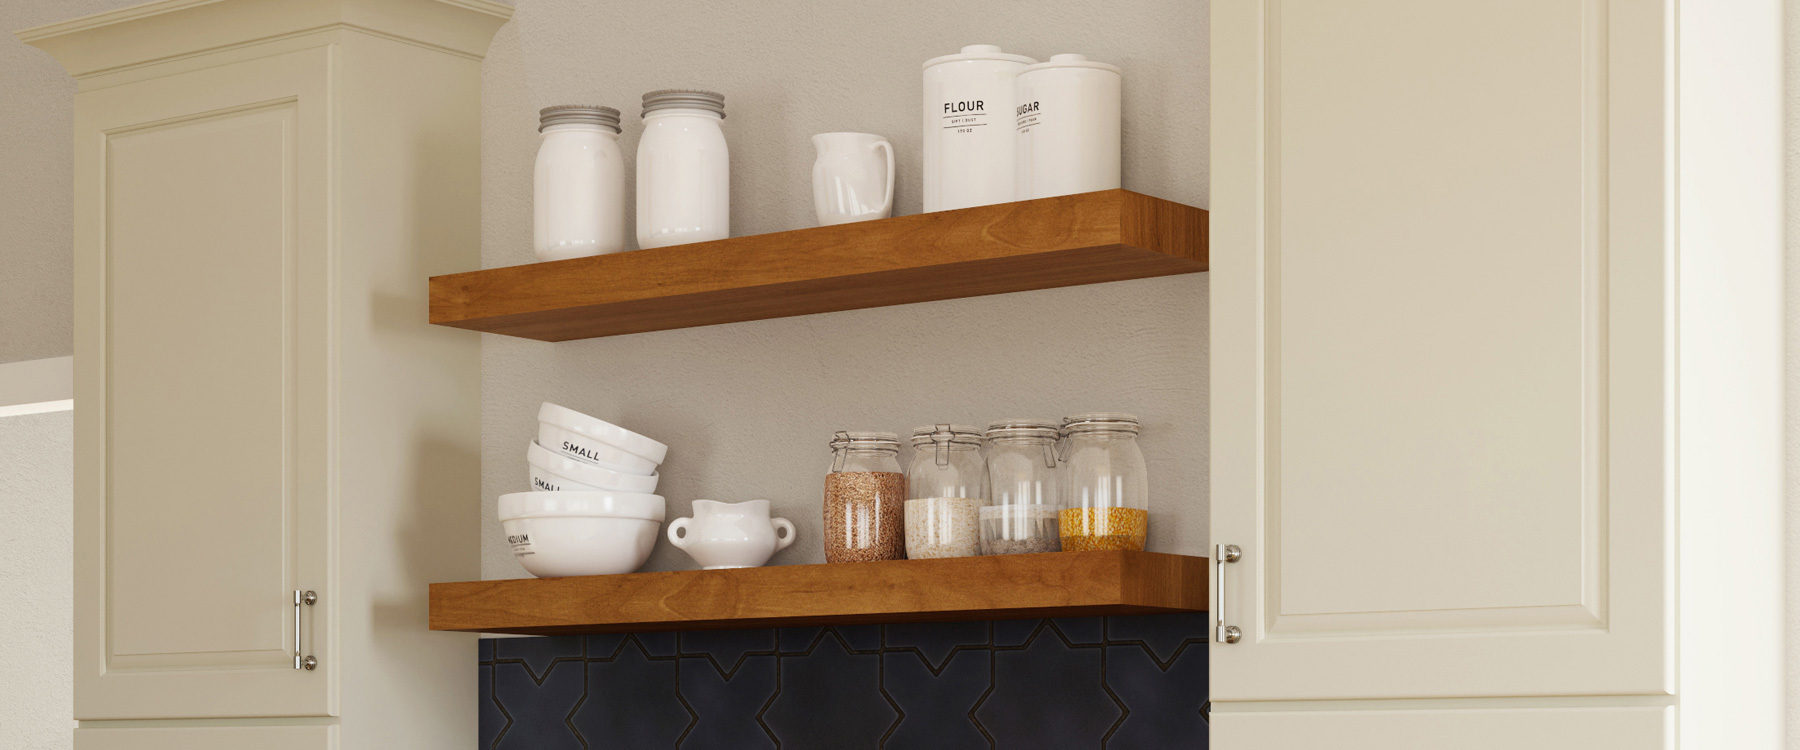 Floating Shelves with Spices between White Kitchen Cabinets | Canyon Creek Cabinet Company